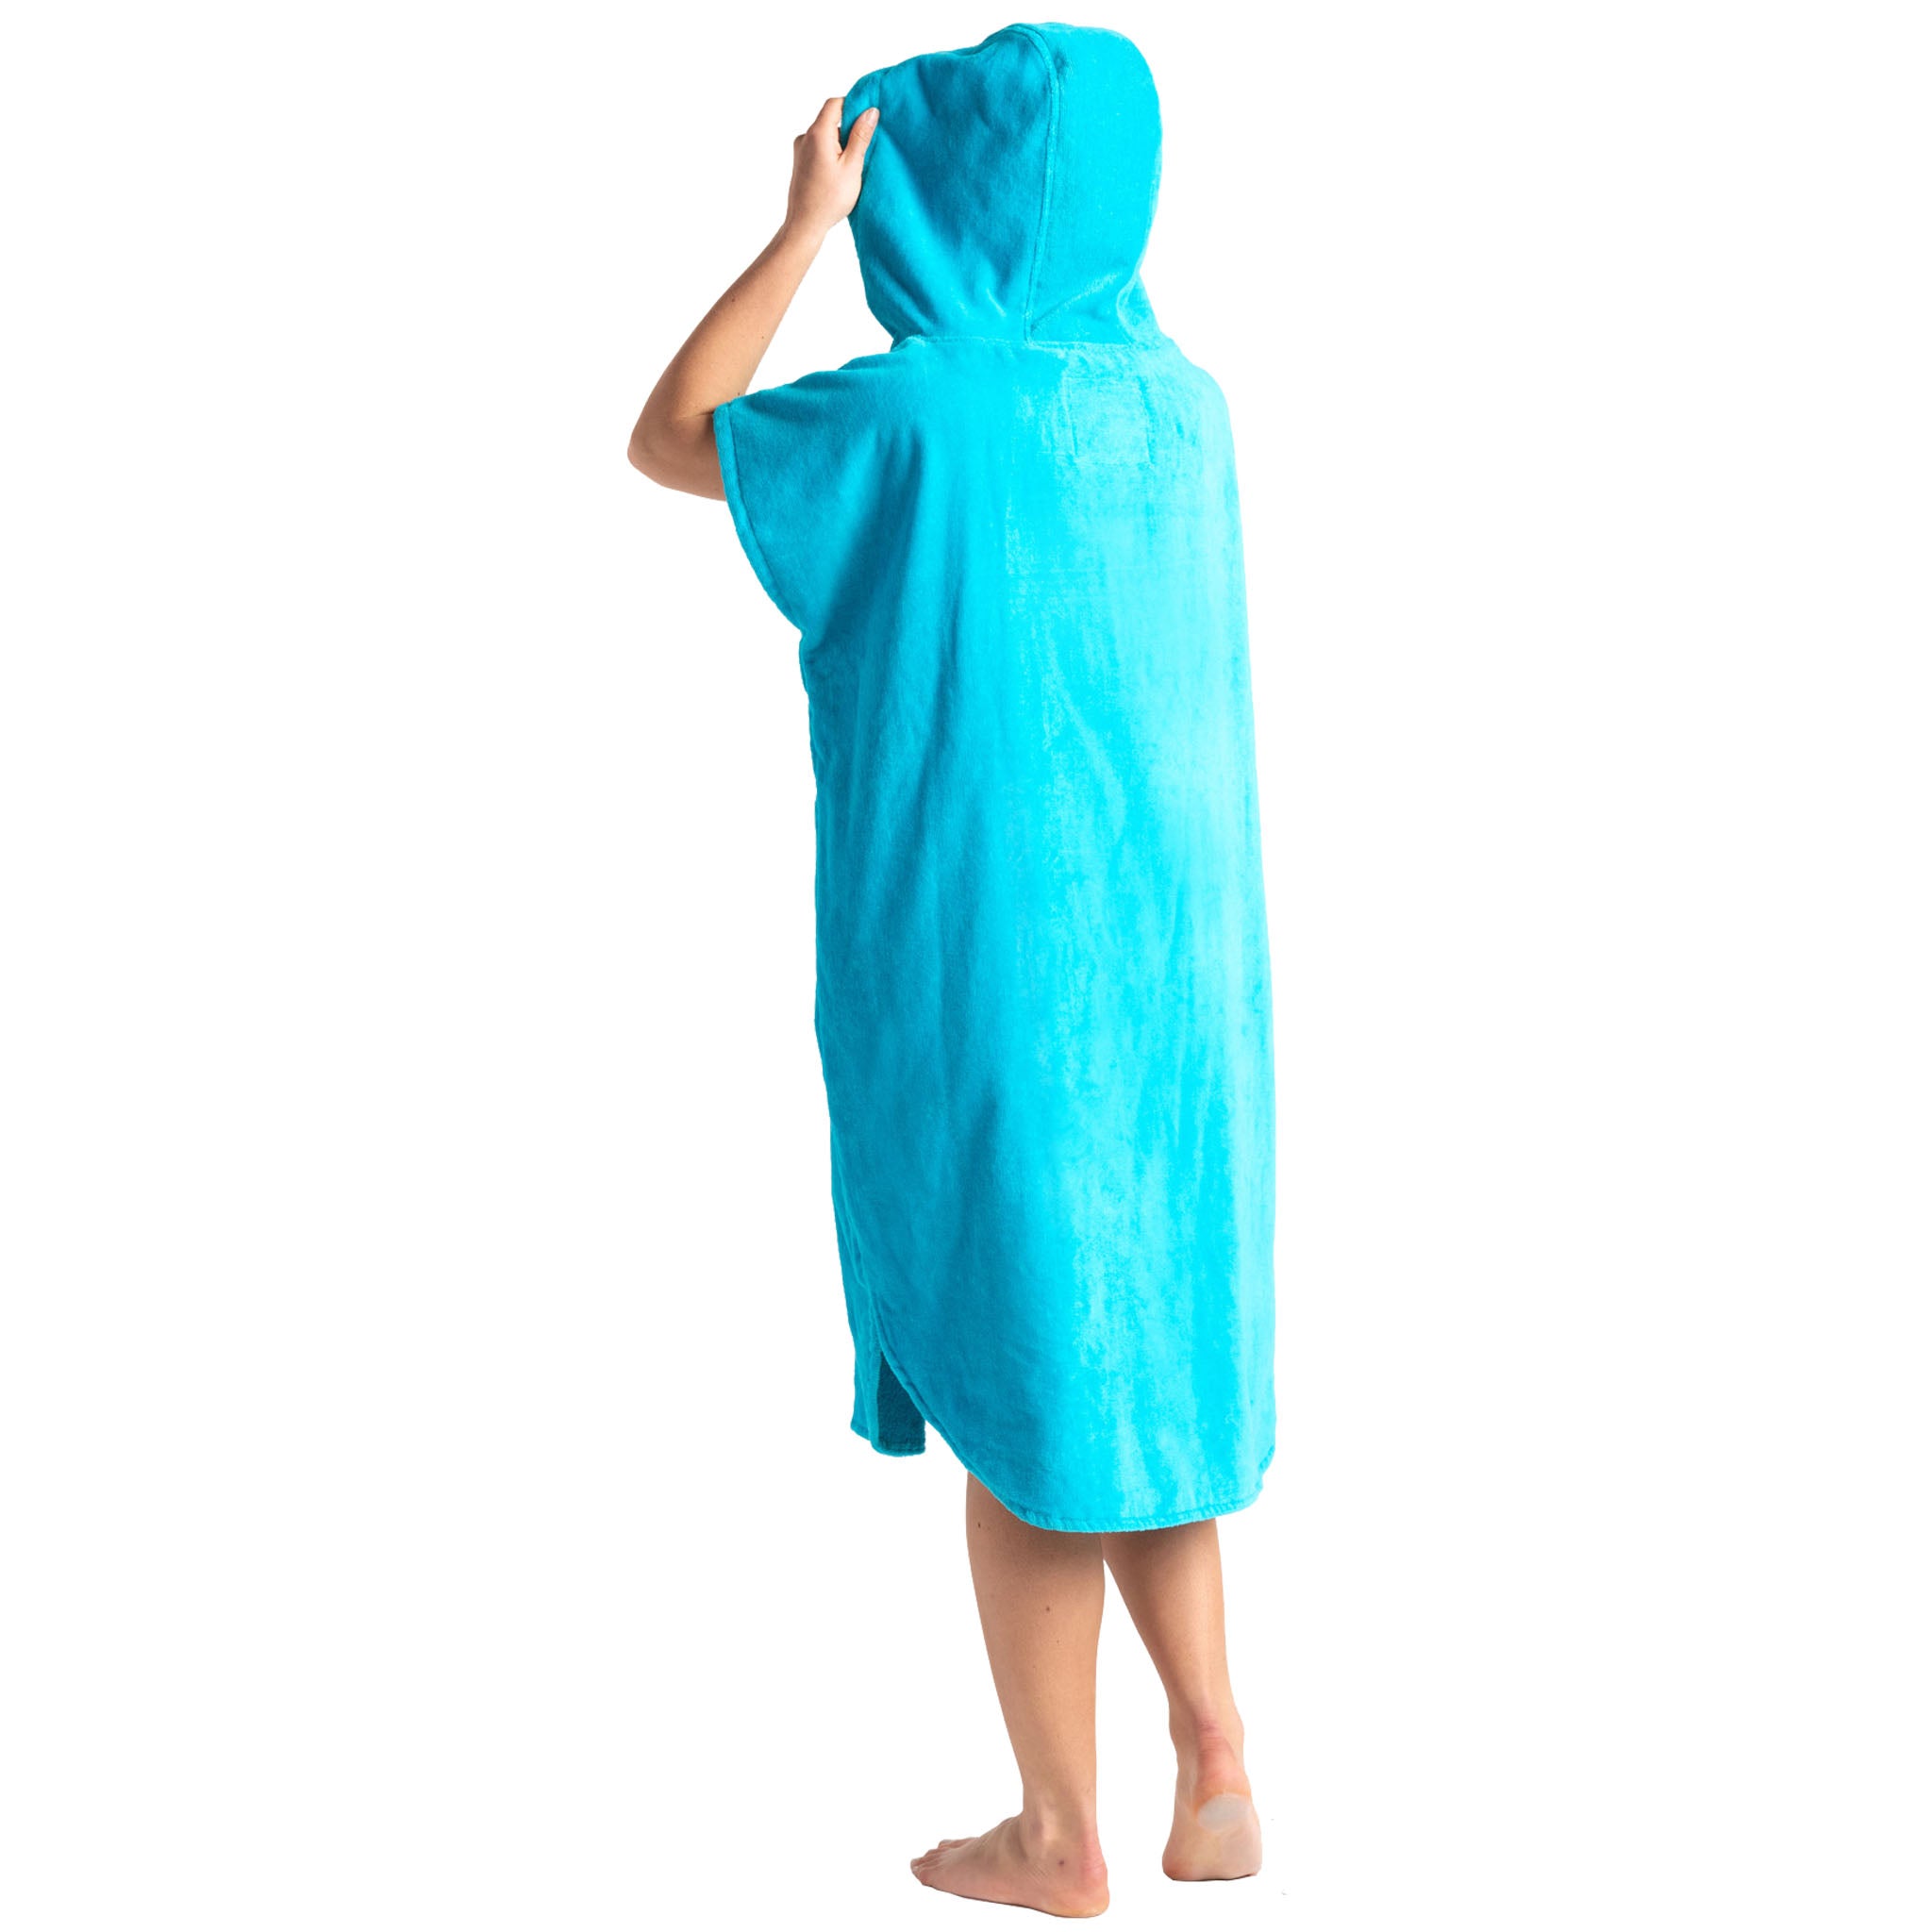 Robie Robes Original Towelling Beach Changing Robe Poncho - Blue Atoll Back with Hood Up